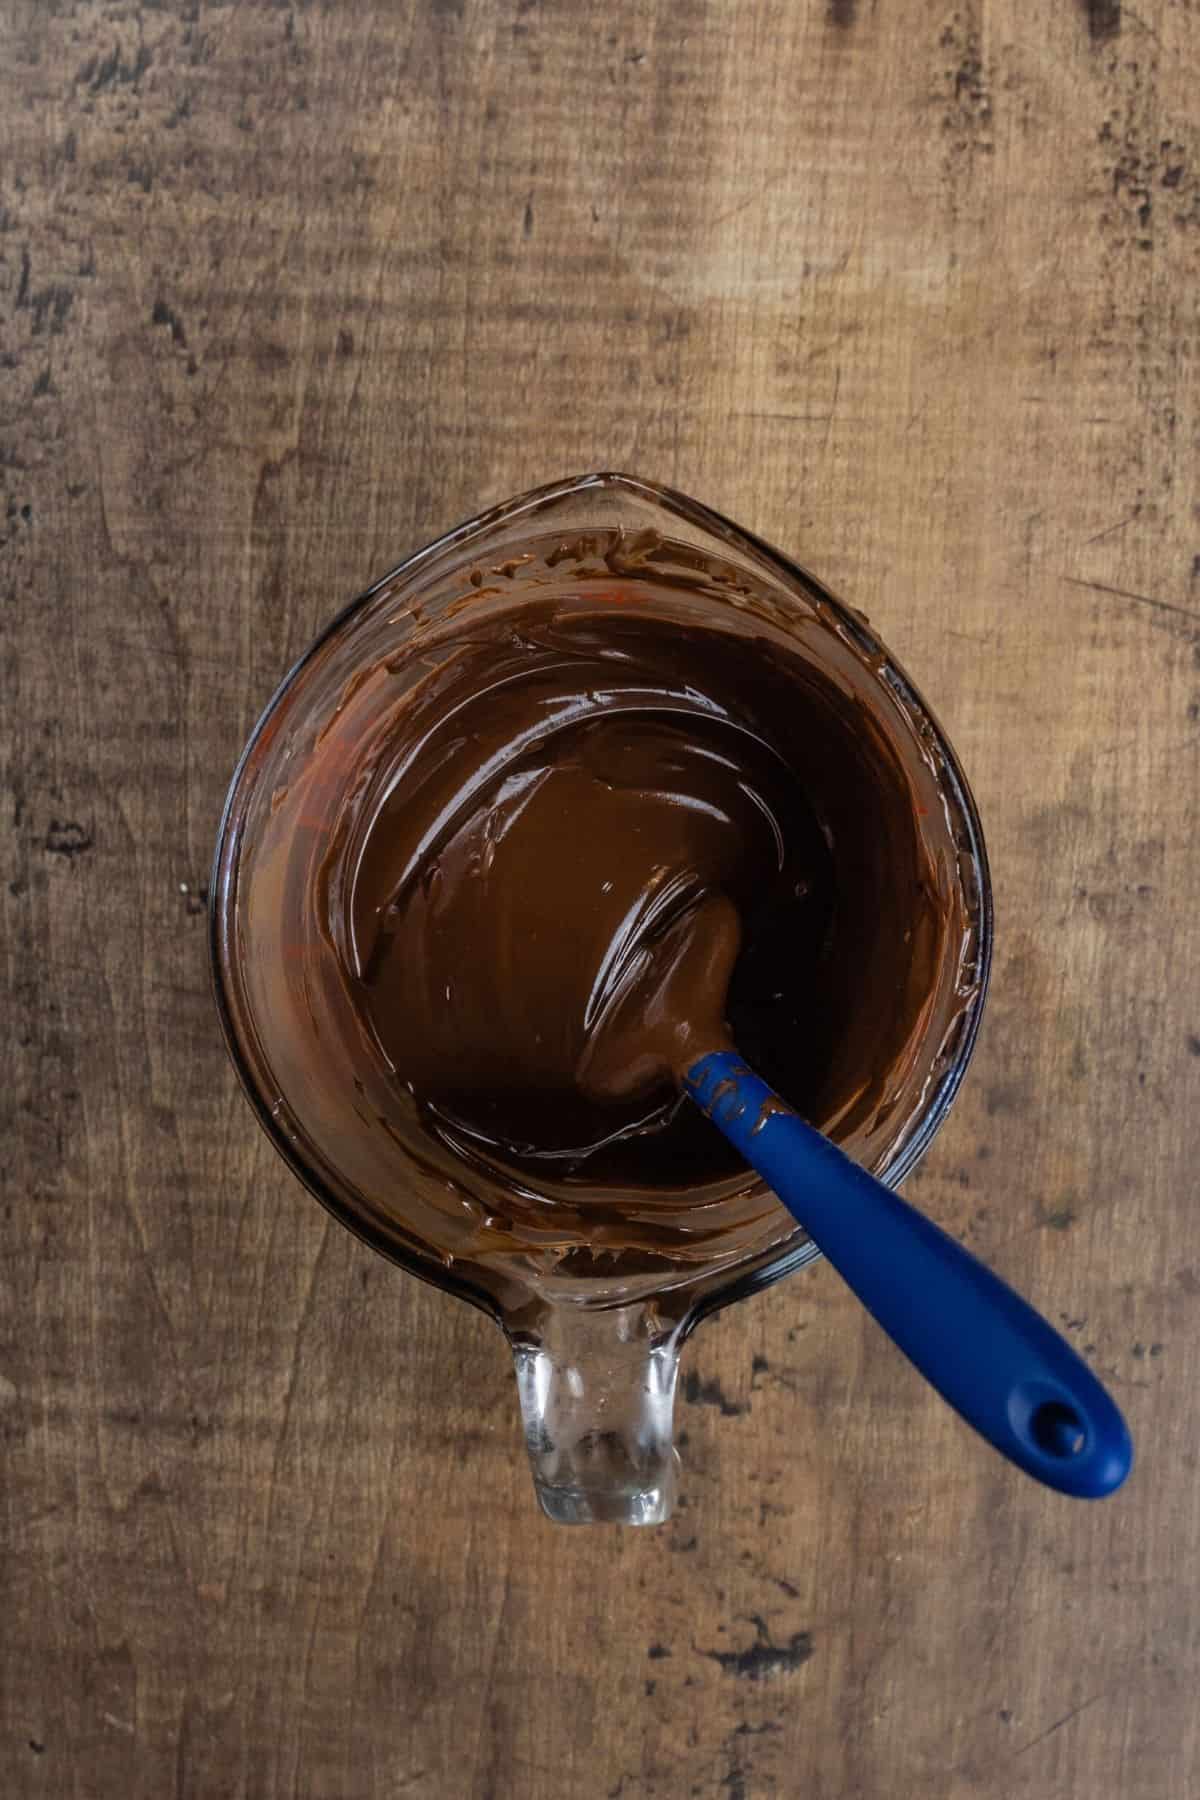 A glass measuring cup is filled with melted chocolate. A blue spatula rests in the chocolate. The cup sits on a wood tabletop.